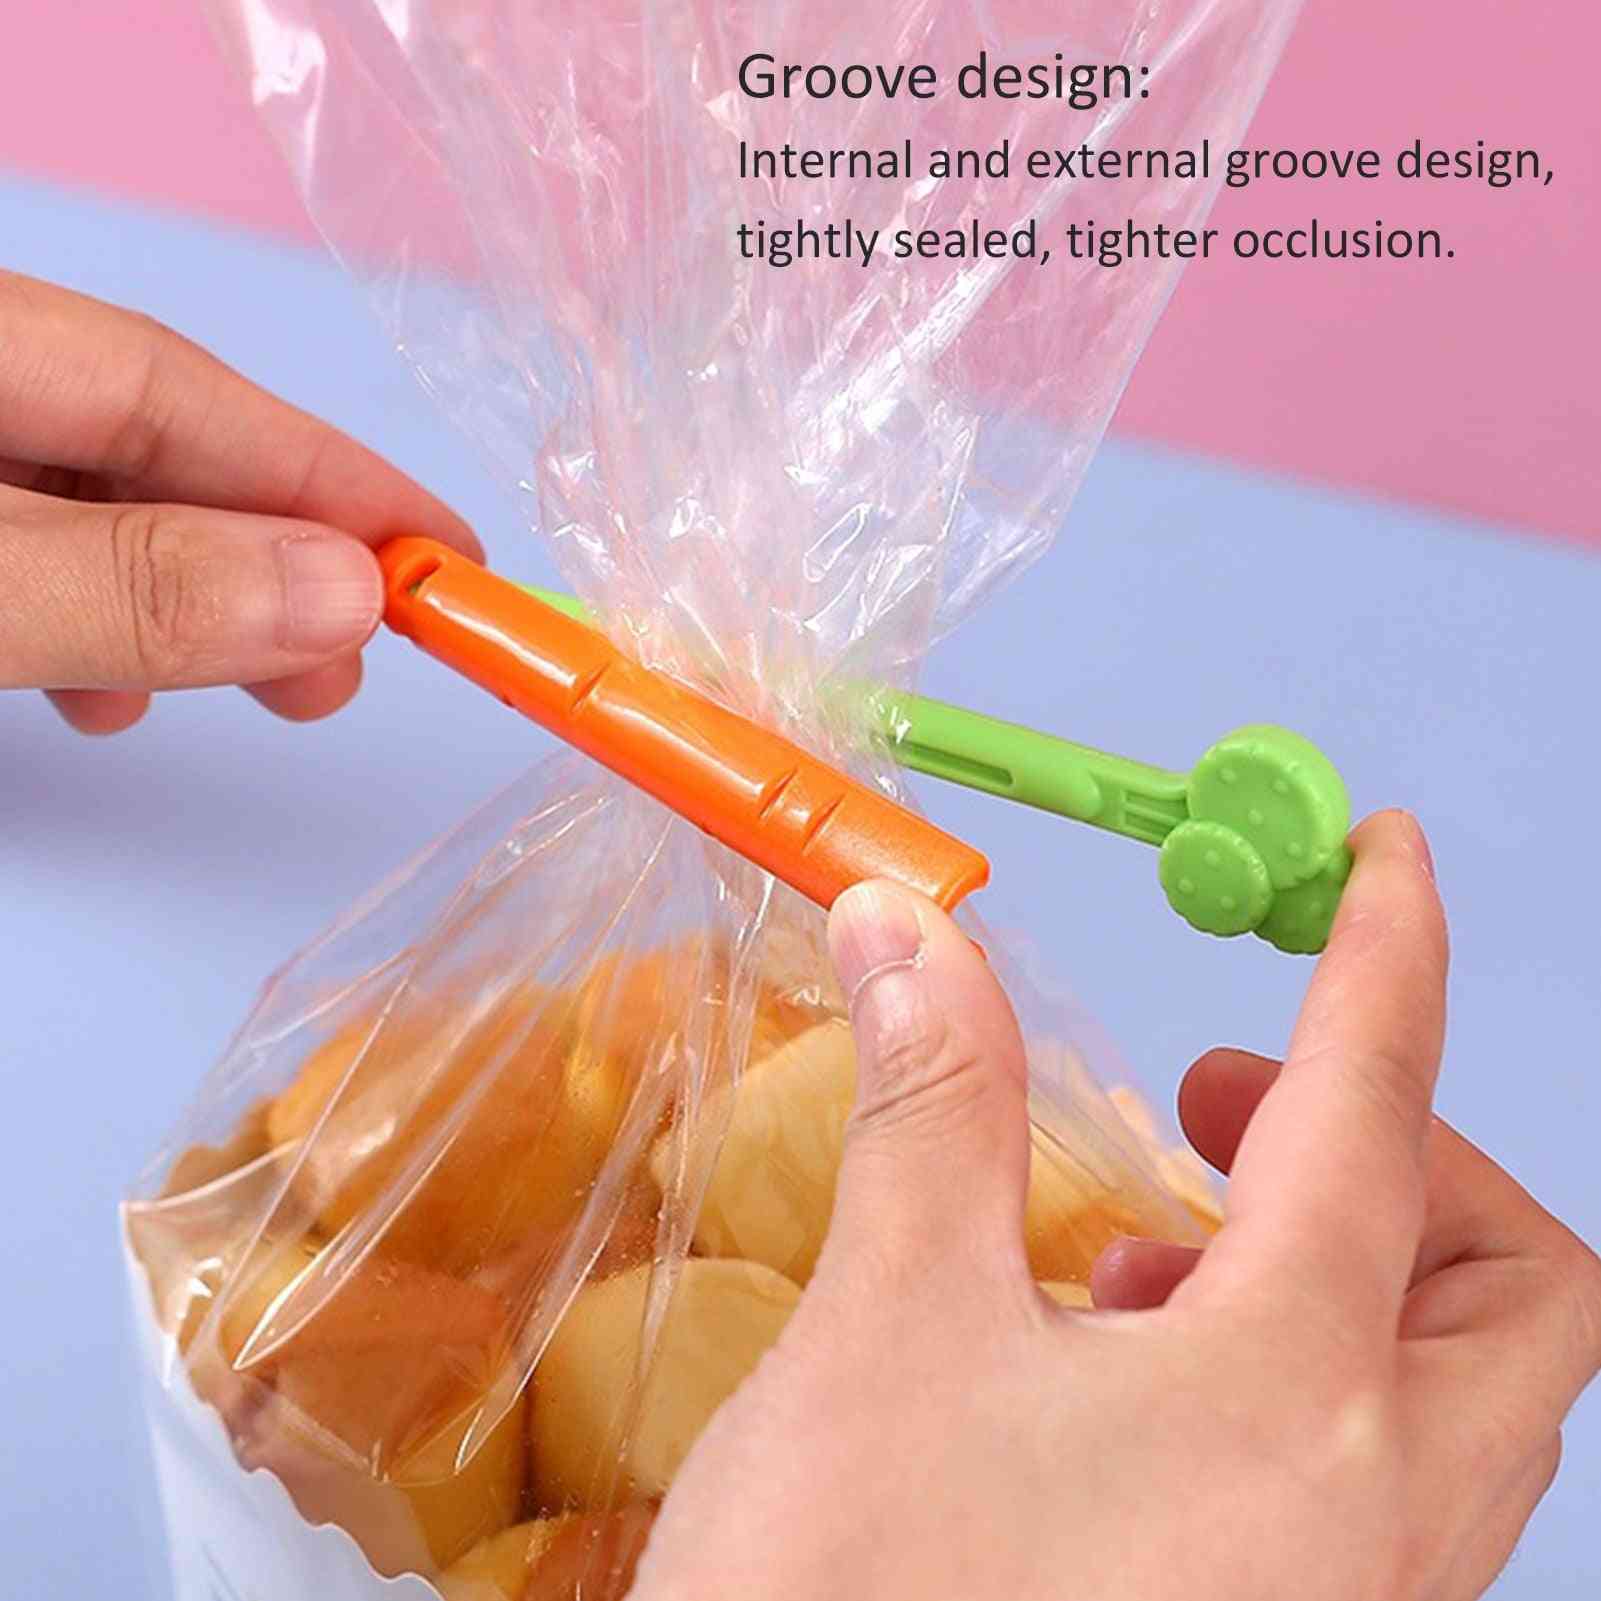 Food Snack Bag Sealing Clip Carrot-shaped With Refrigerator Magnet